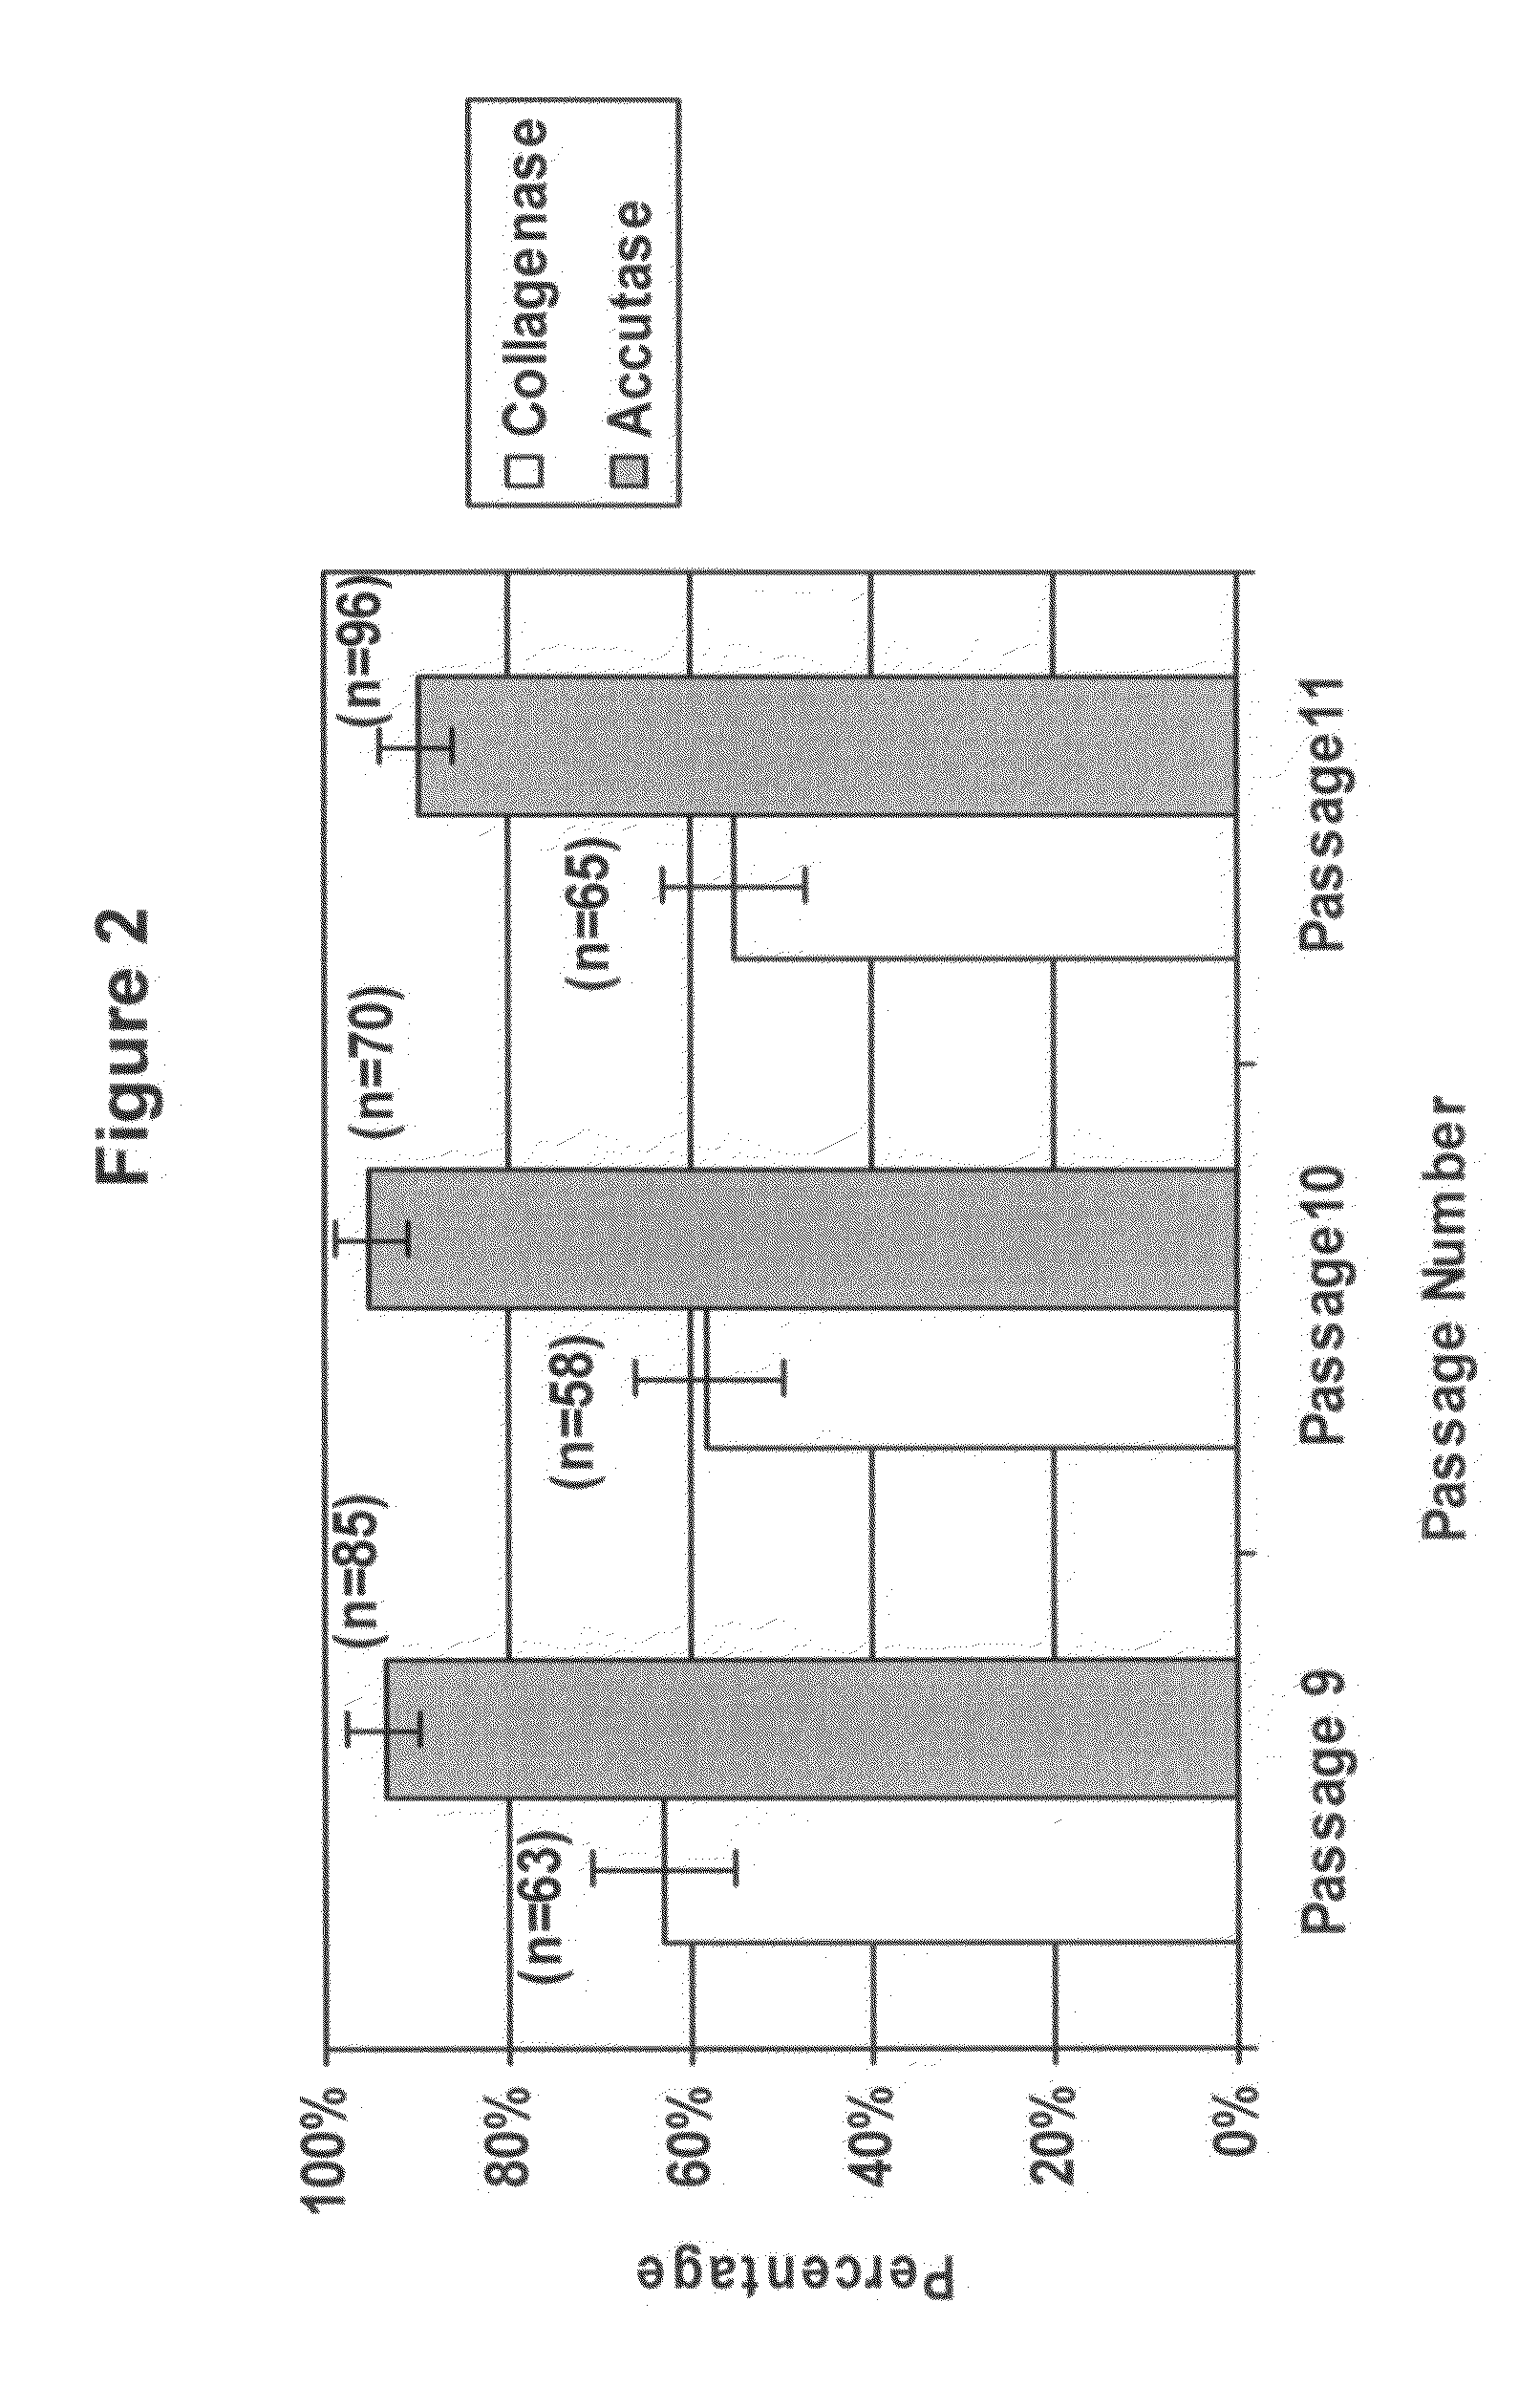 Methods for culture and production of single cell populations of human embryonic stem cells